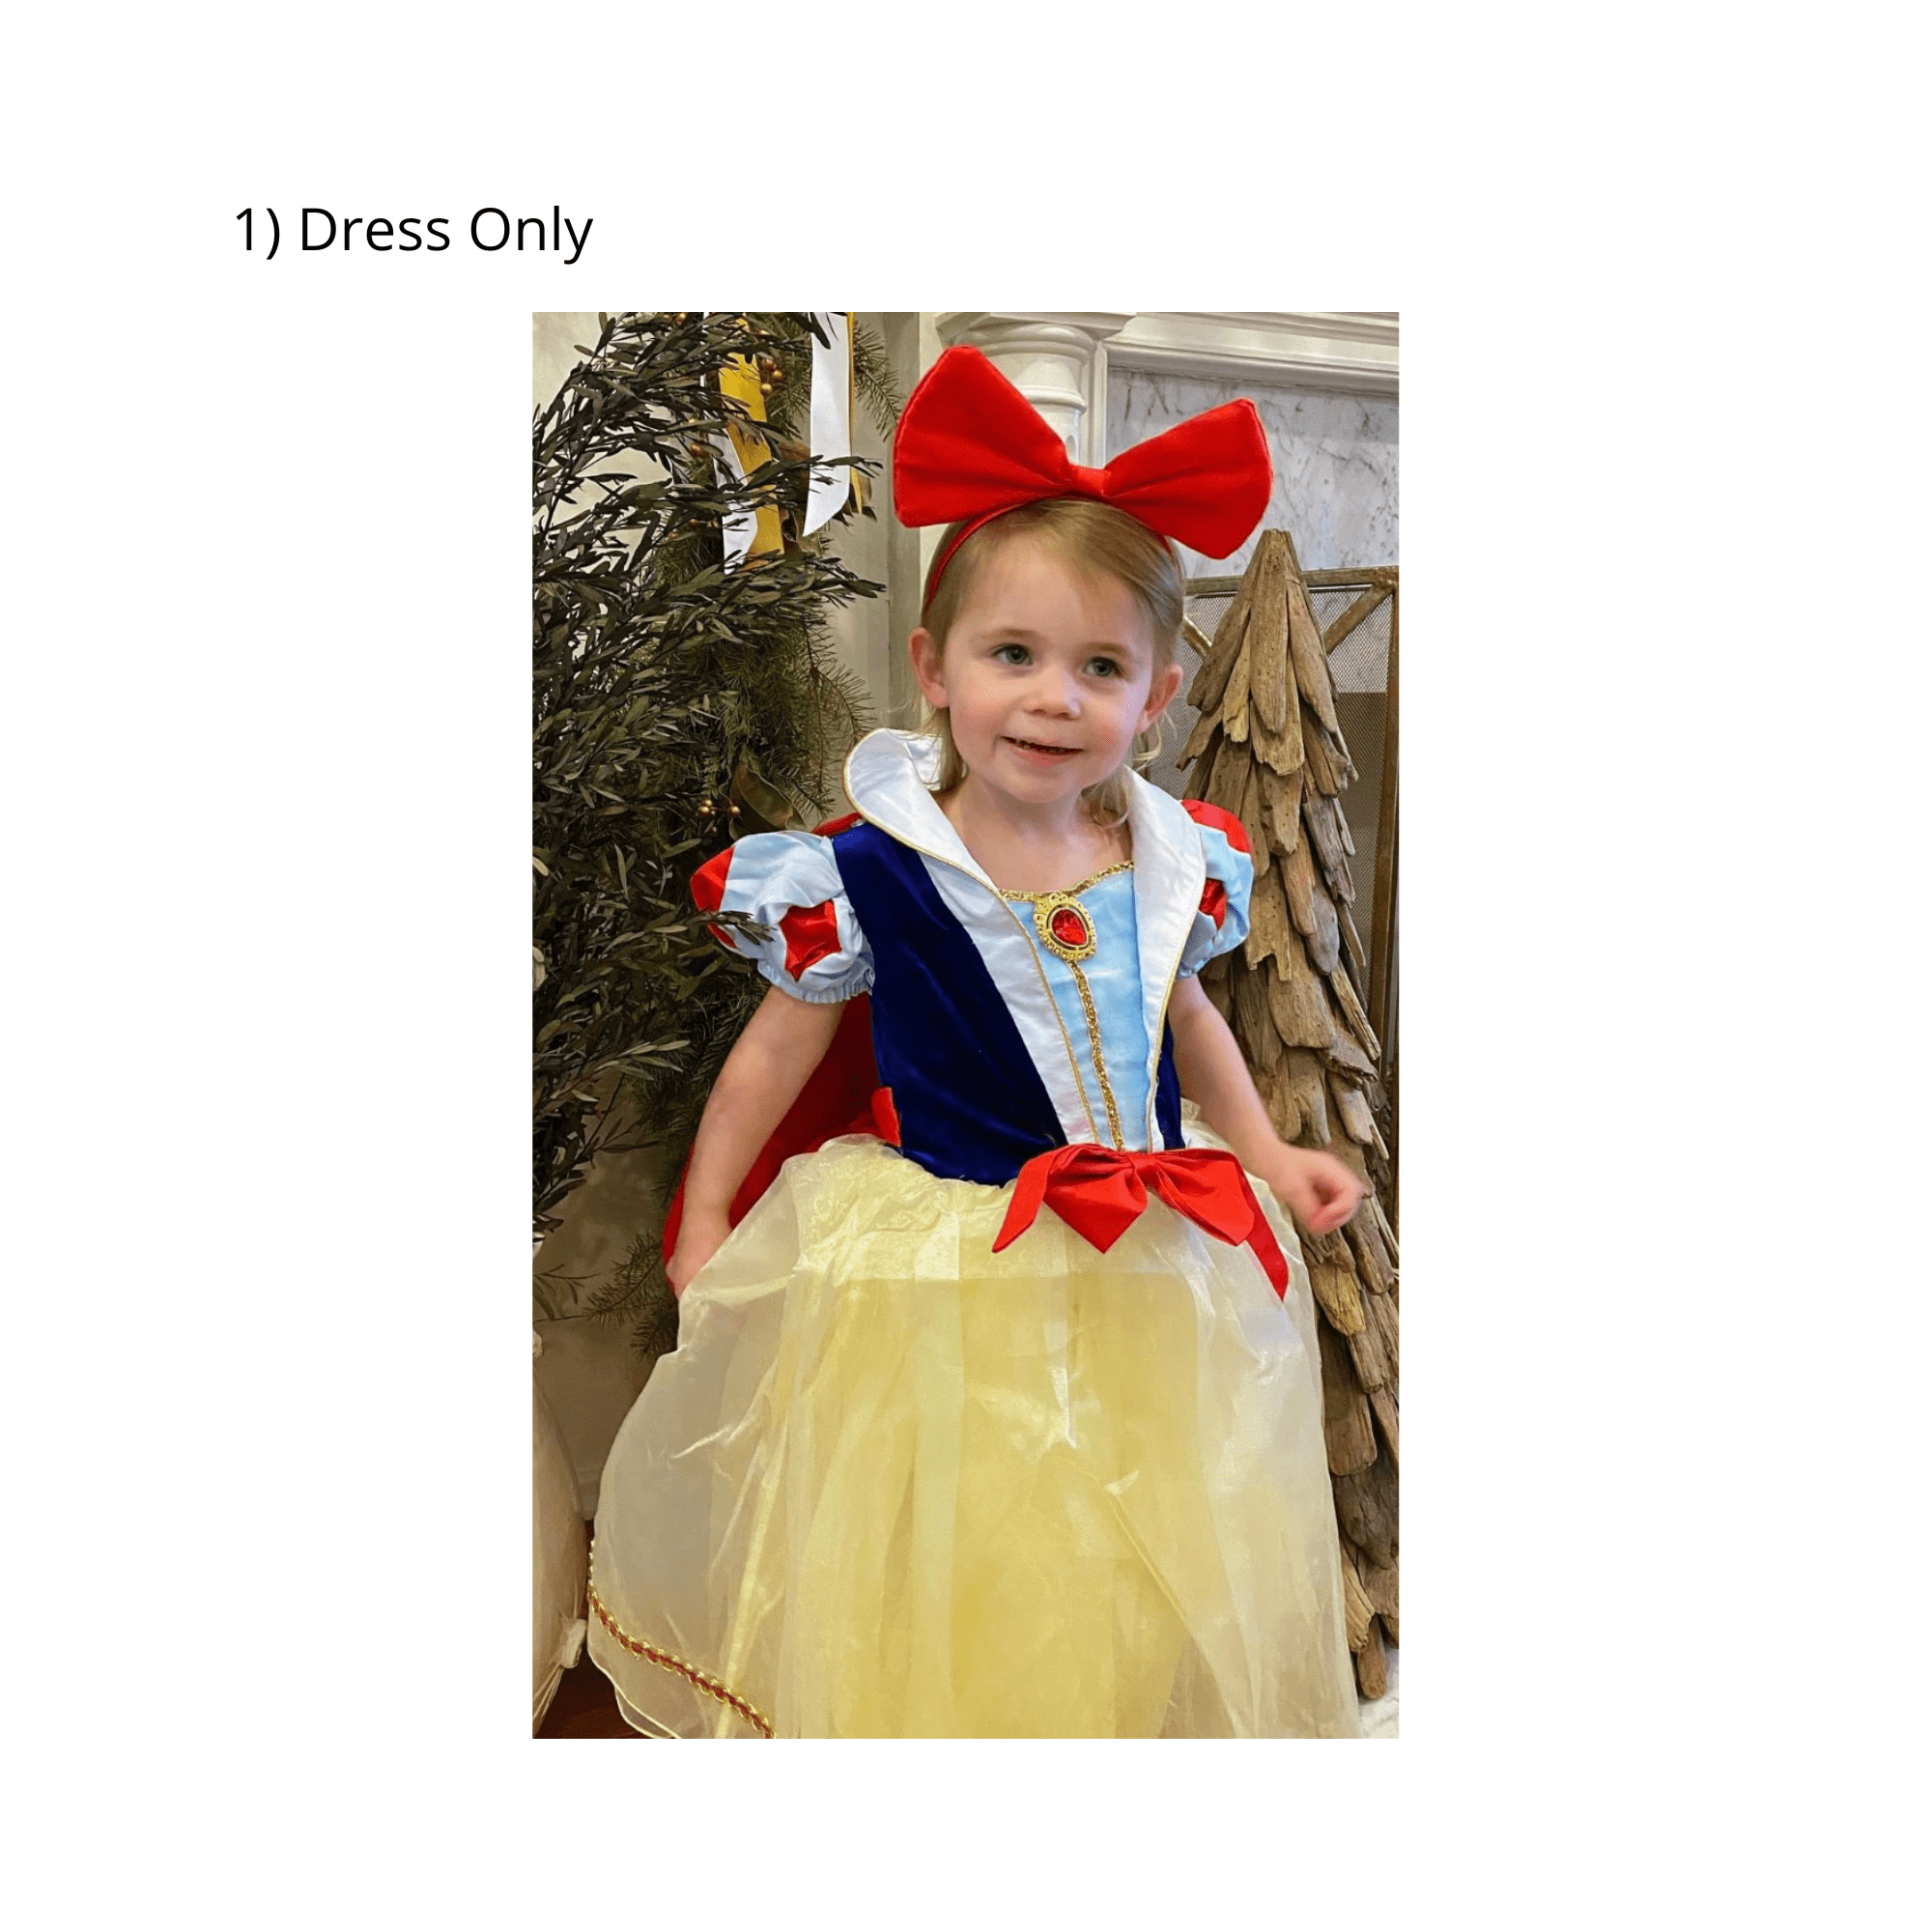 Disney-Inspired Snow White Deluxe Costume for Dress Up or Birthday Dress Only